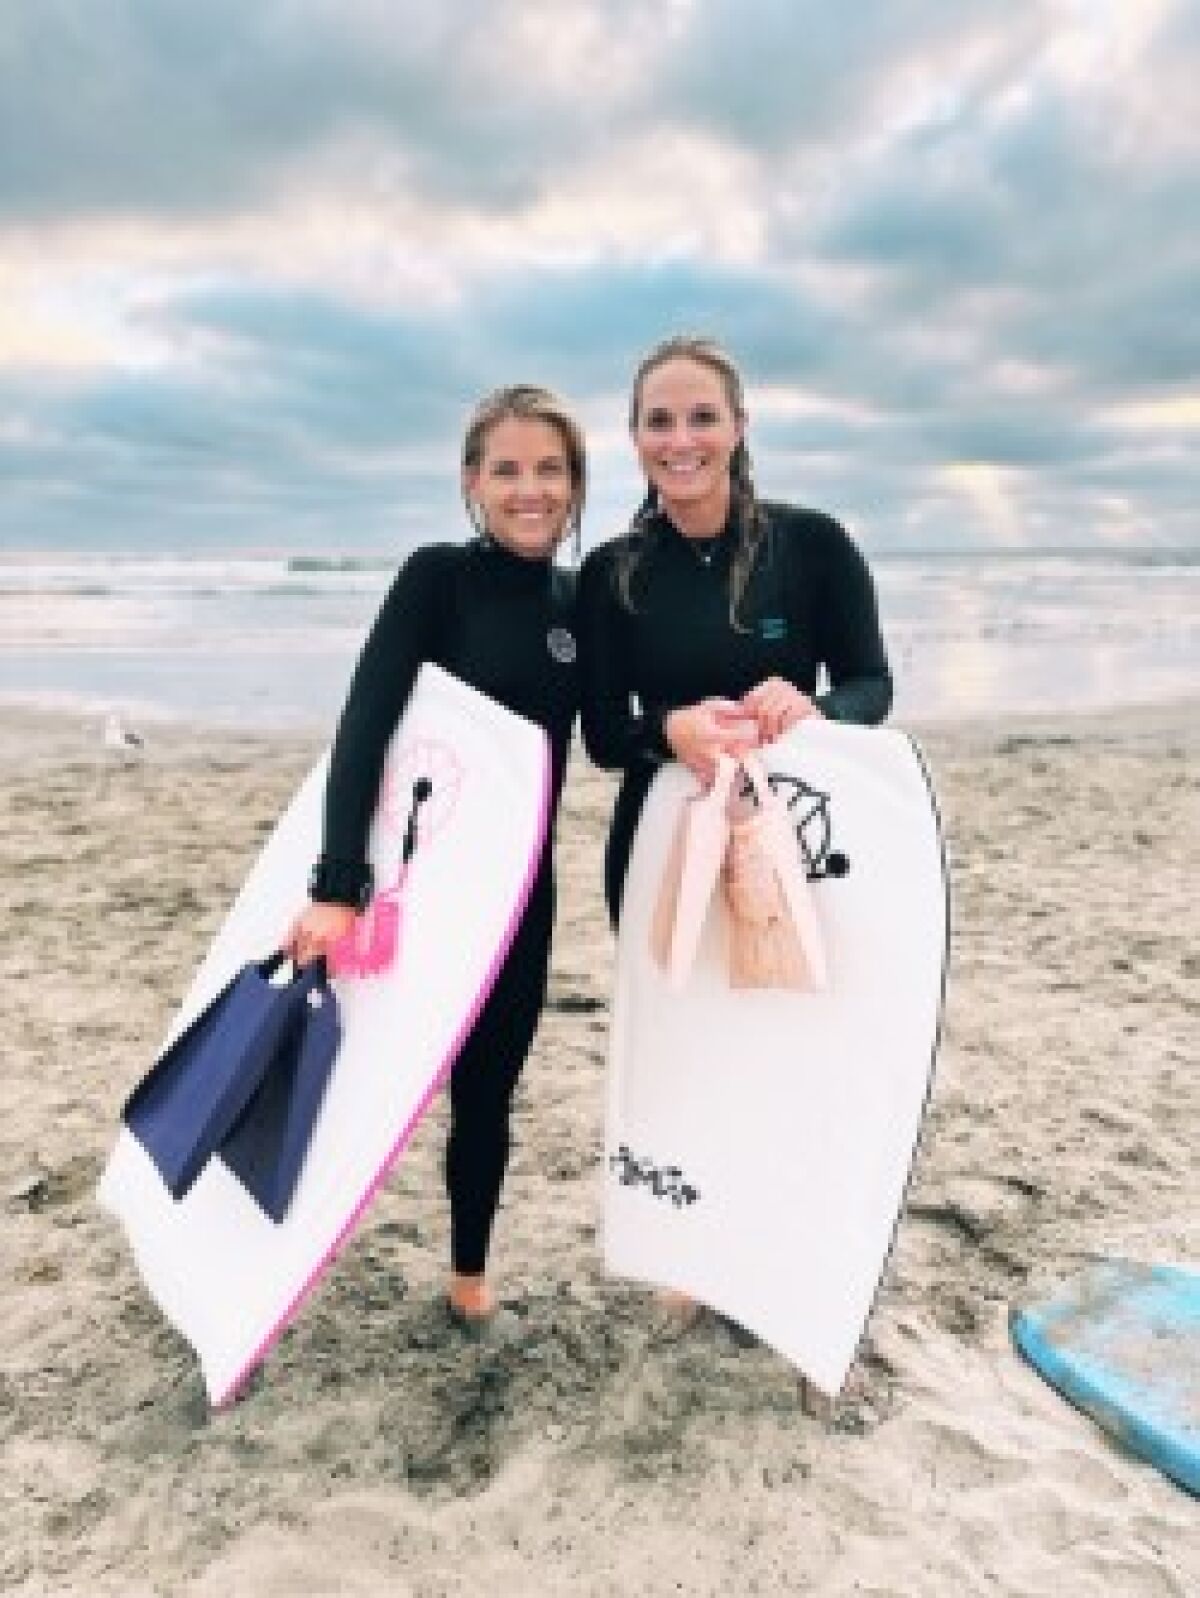 Cristi Turvey, left, and Lauren Bennett, right, started a boogie boarding club for mothers, called "Boogie Moms."